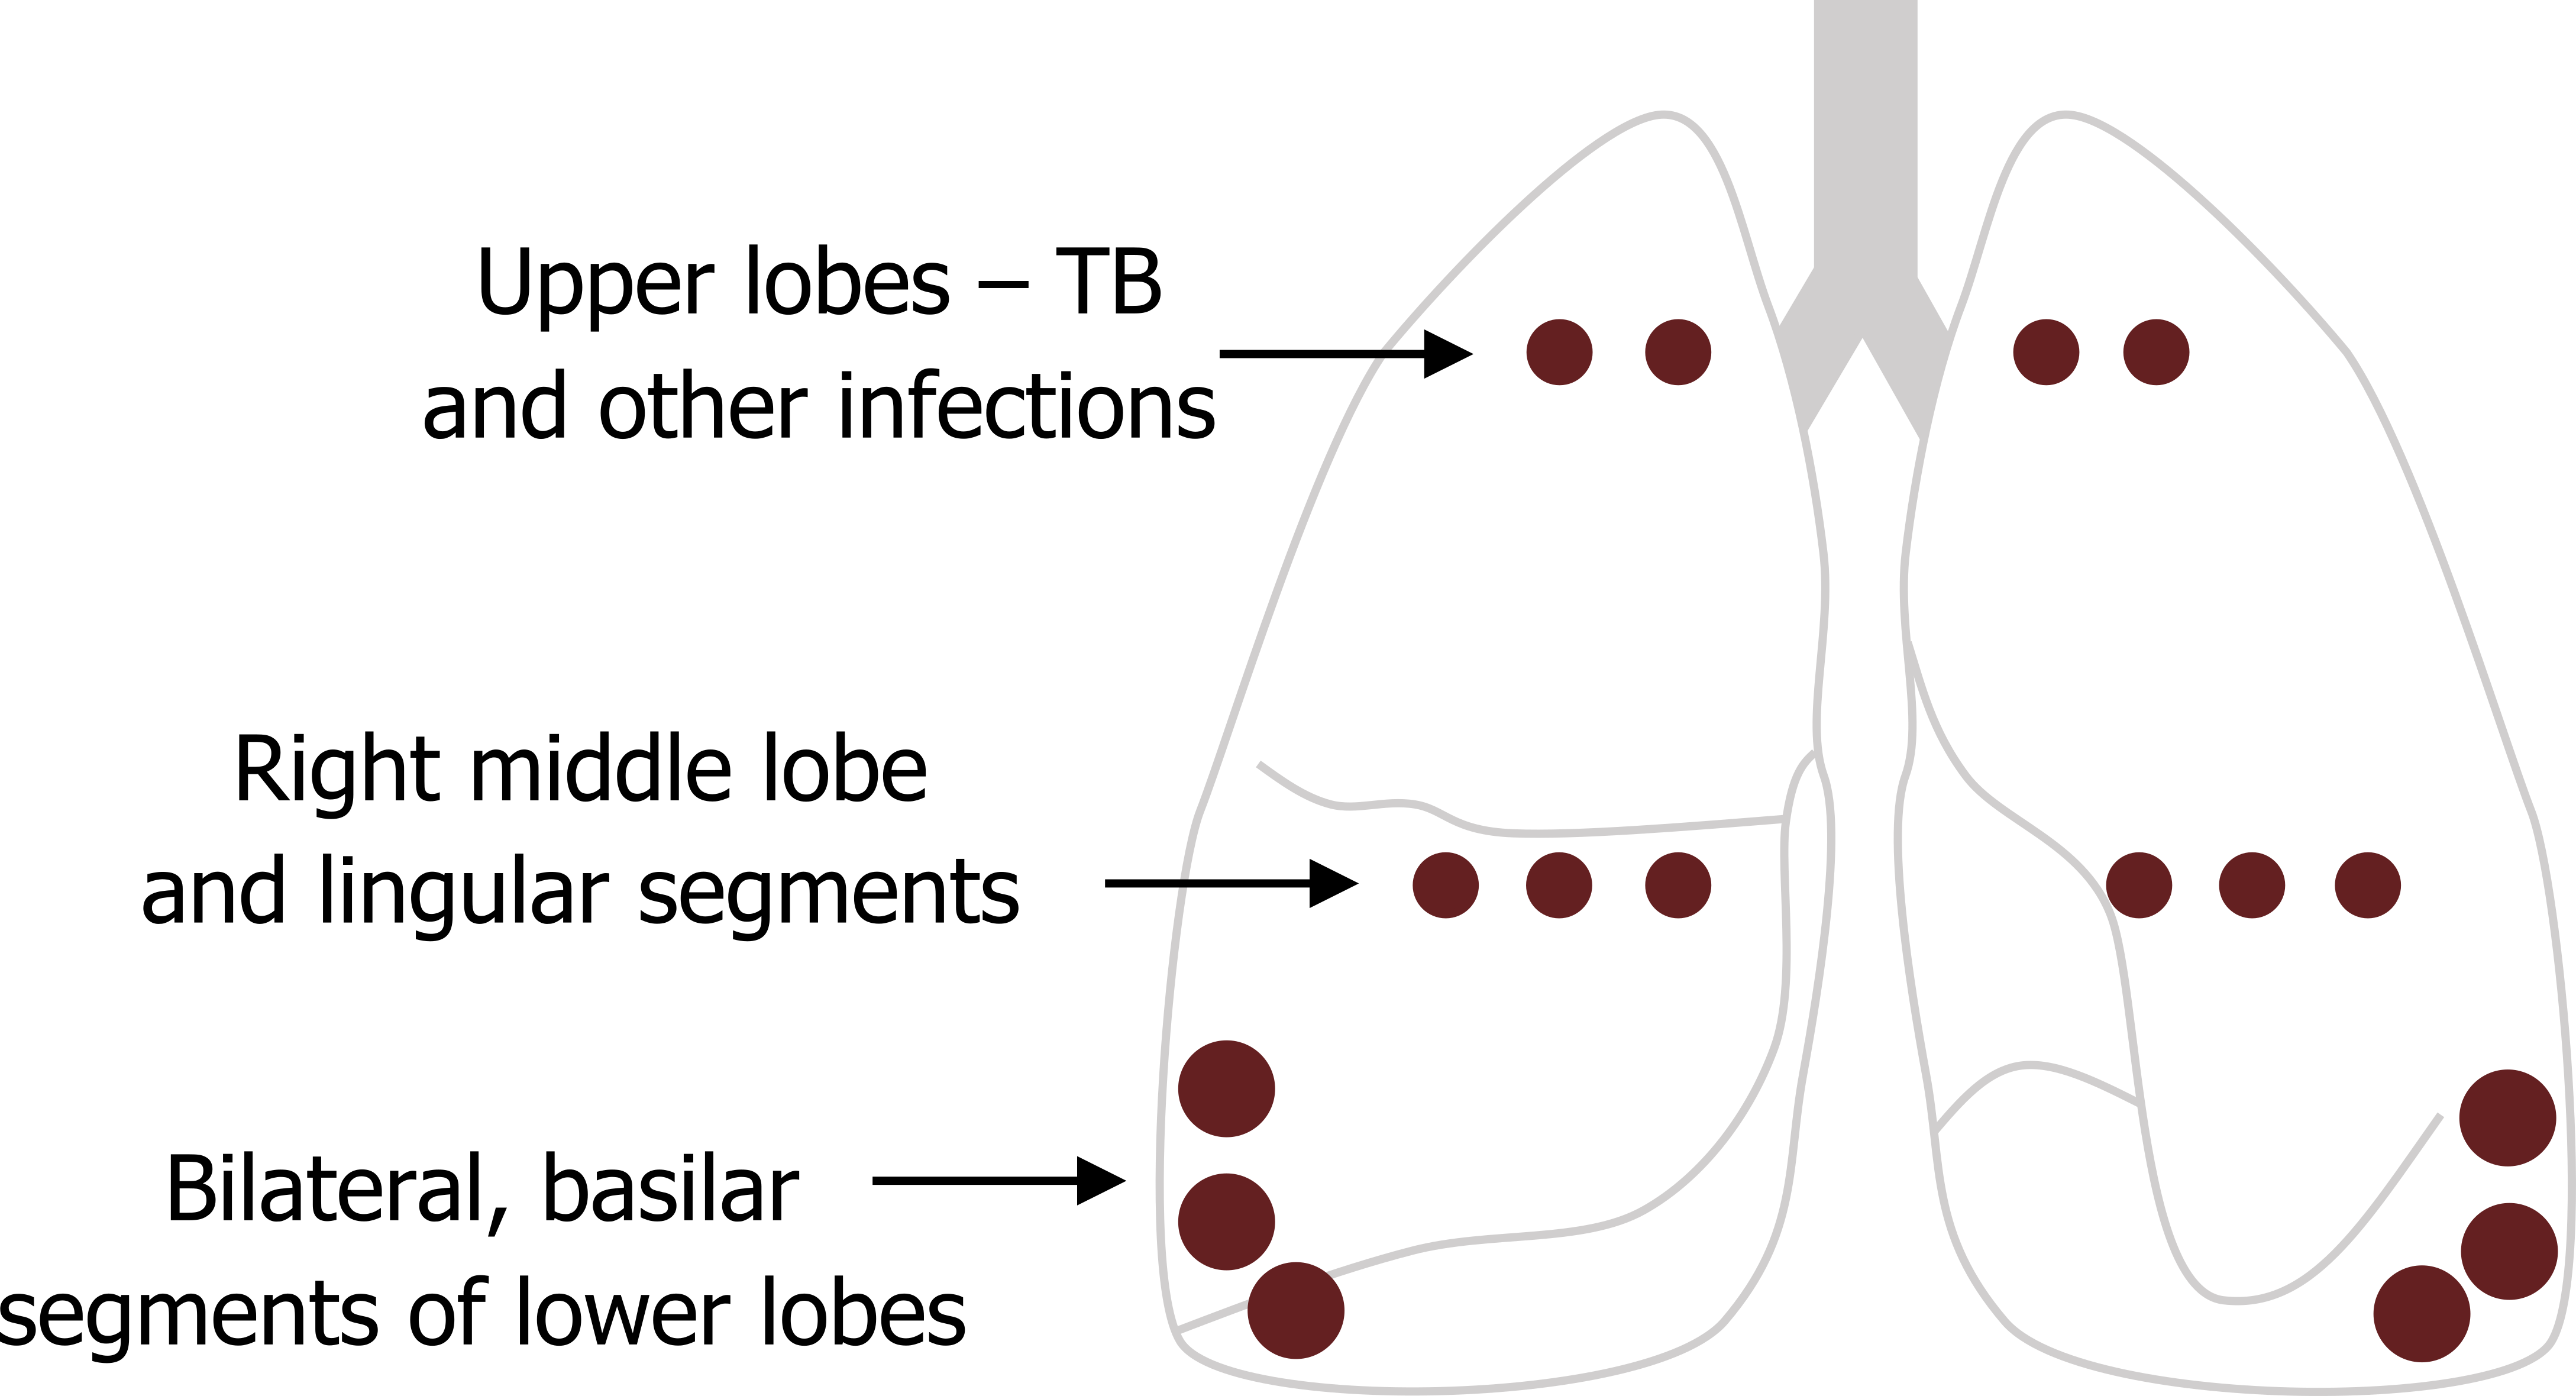 Outline of the lungs. From top to bottom: Upper lobes - TB and other infections. Right middle lobe and lingular segments. Bilateral, basilar segments of lower lobes.